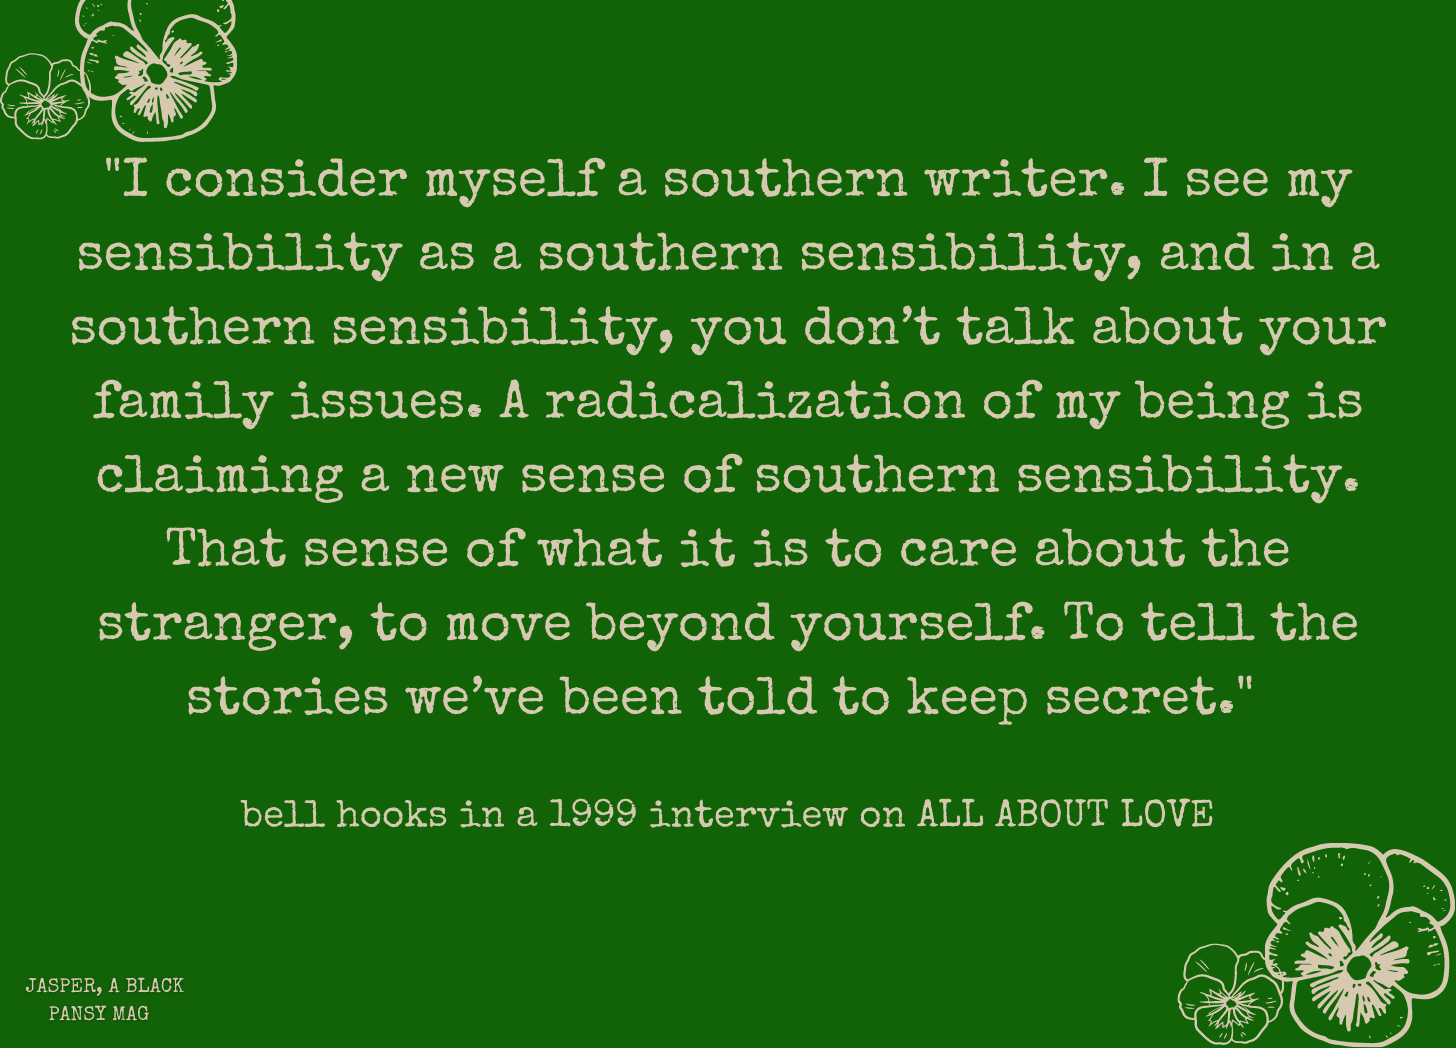 Image: Cream text over green background that reads: "I consider myself a southern writer. I see my sensibility as a southern sensibility, and in a southern sensibility, you don’t talk about your family issues. A radicalization of my being is claiming a new sense of southern sensibility. That sense of what it is to care about the stranger, to move beyond yourself. To tell the stories we’ve been told to keep secret."   bell hooks in a 1999 interview on ALL ABOUT LOVE 